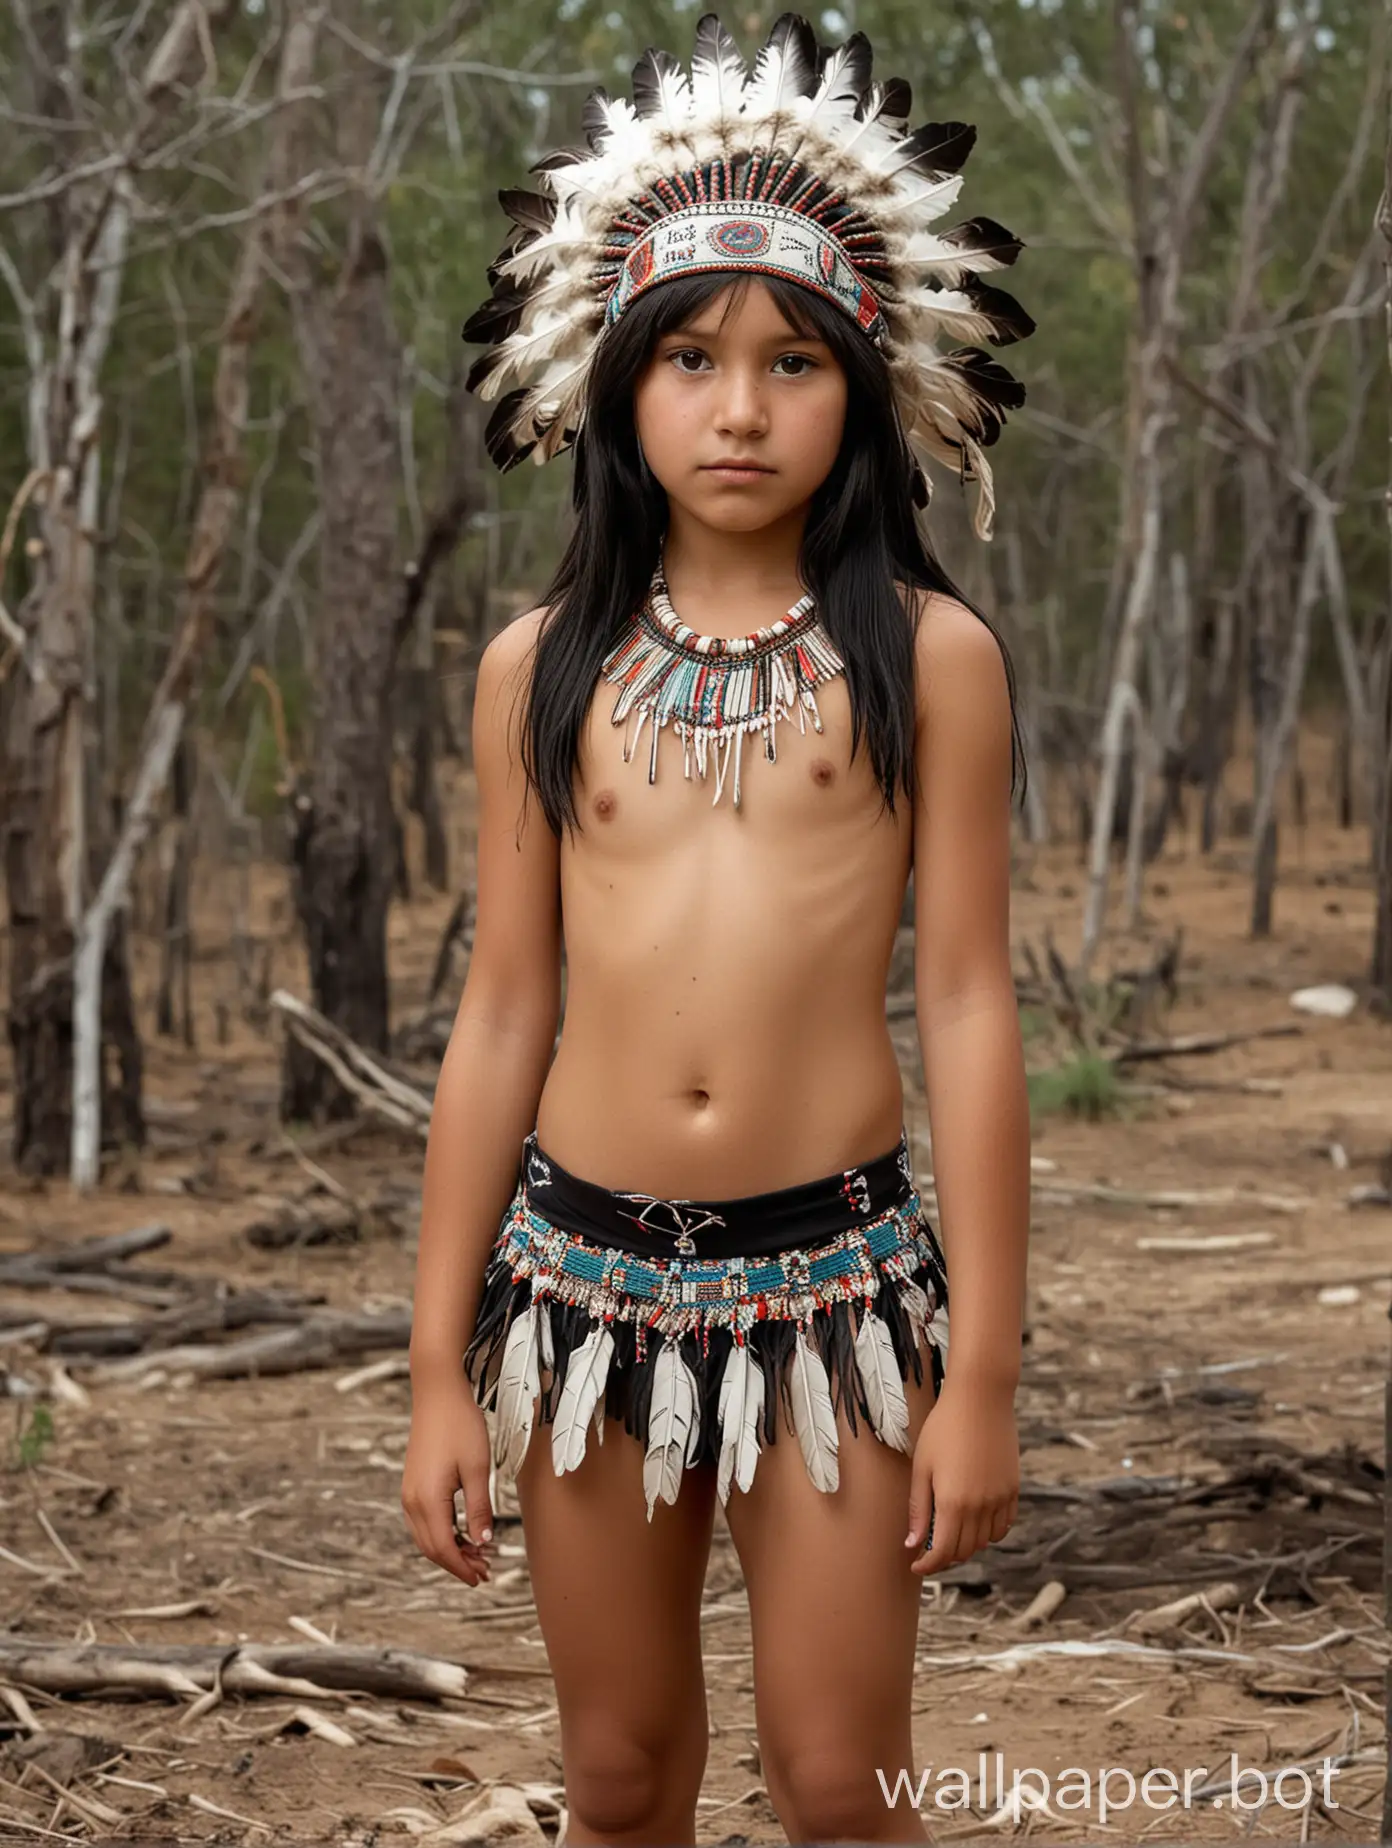 11 year old native American girl black hair black eyes wearing headdress a small mini skirt and a native bikini top with little perky breasts and standing in a native American burial ground 